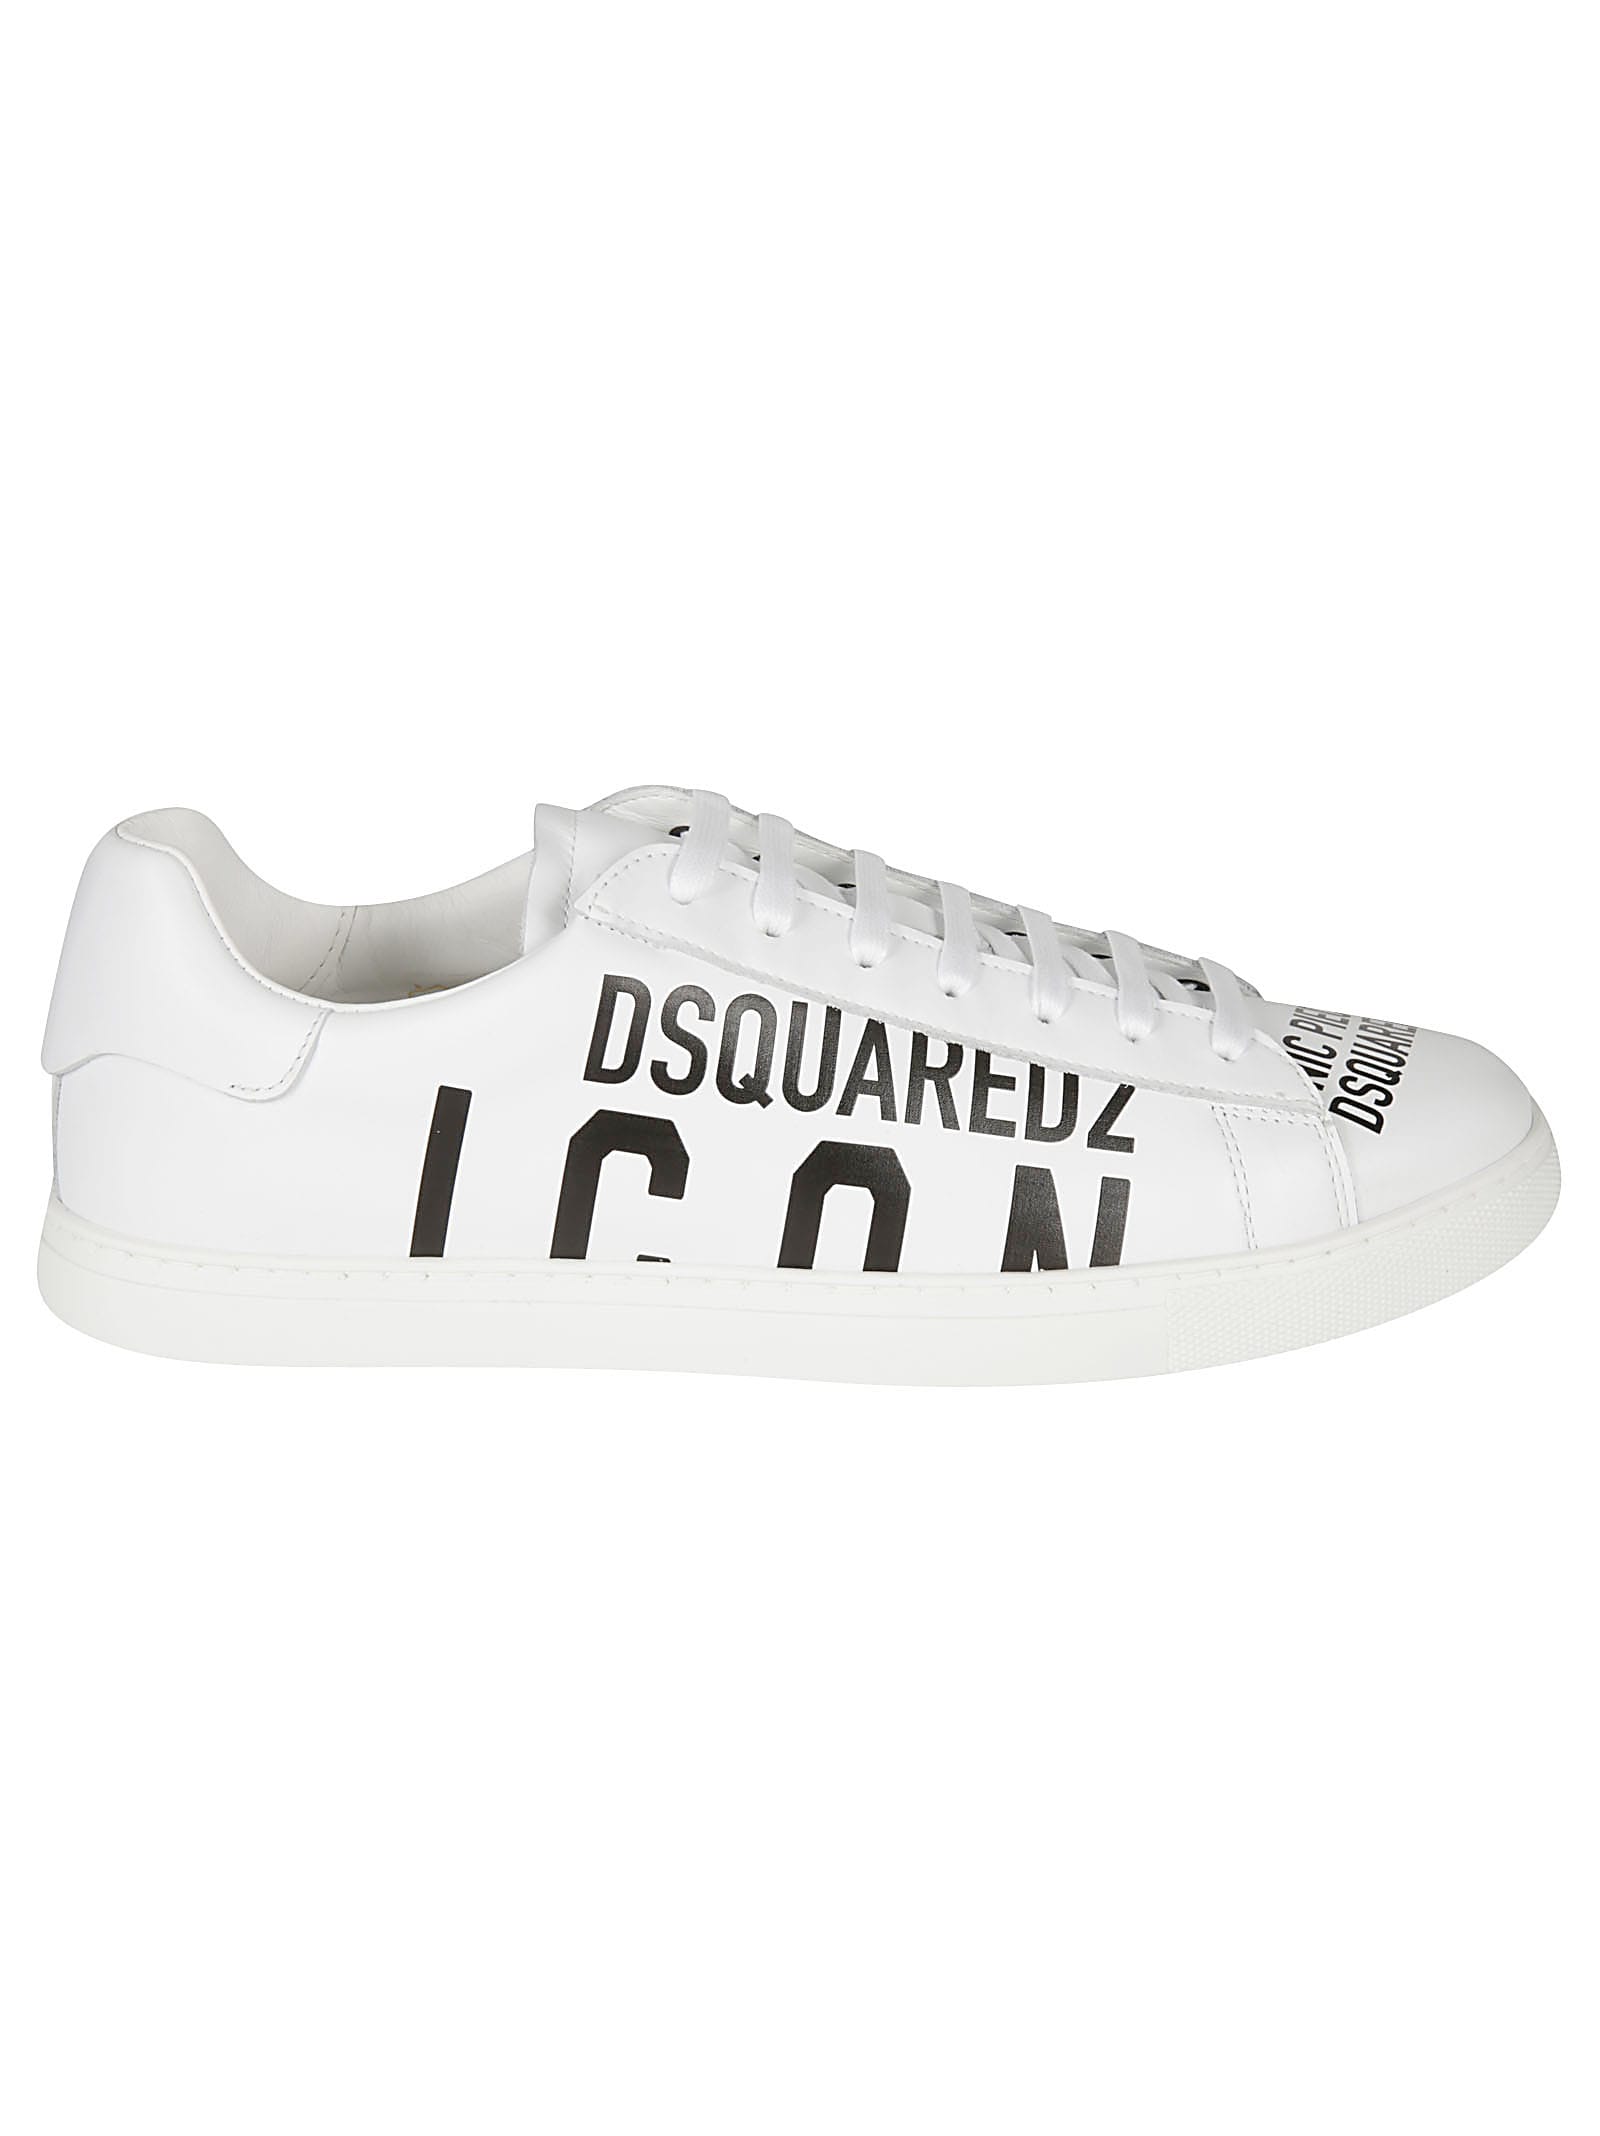 dsquared2 lace-up sneakers